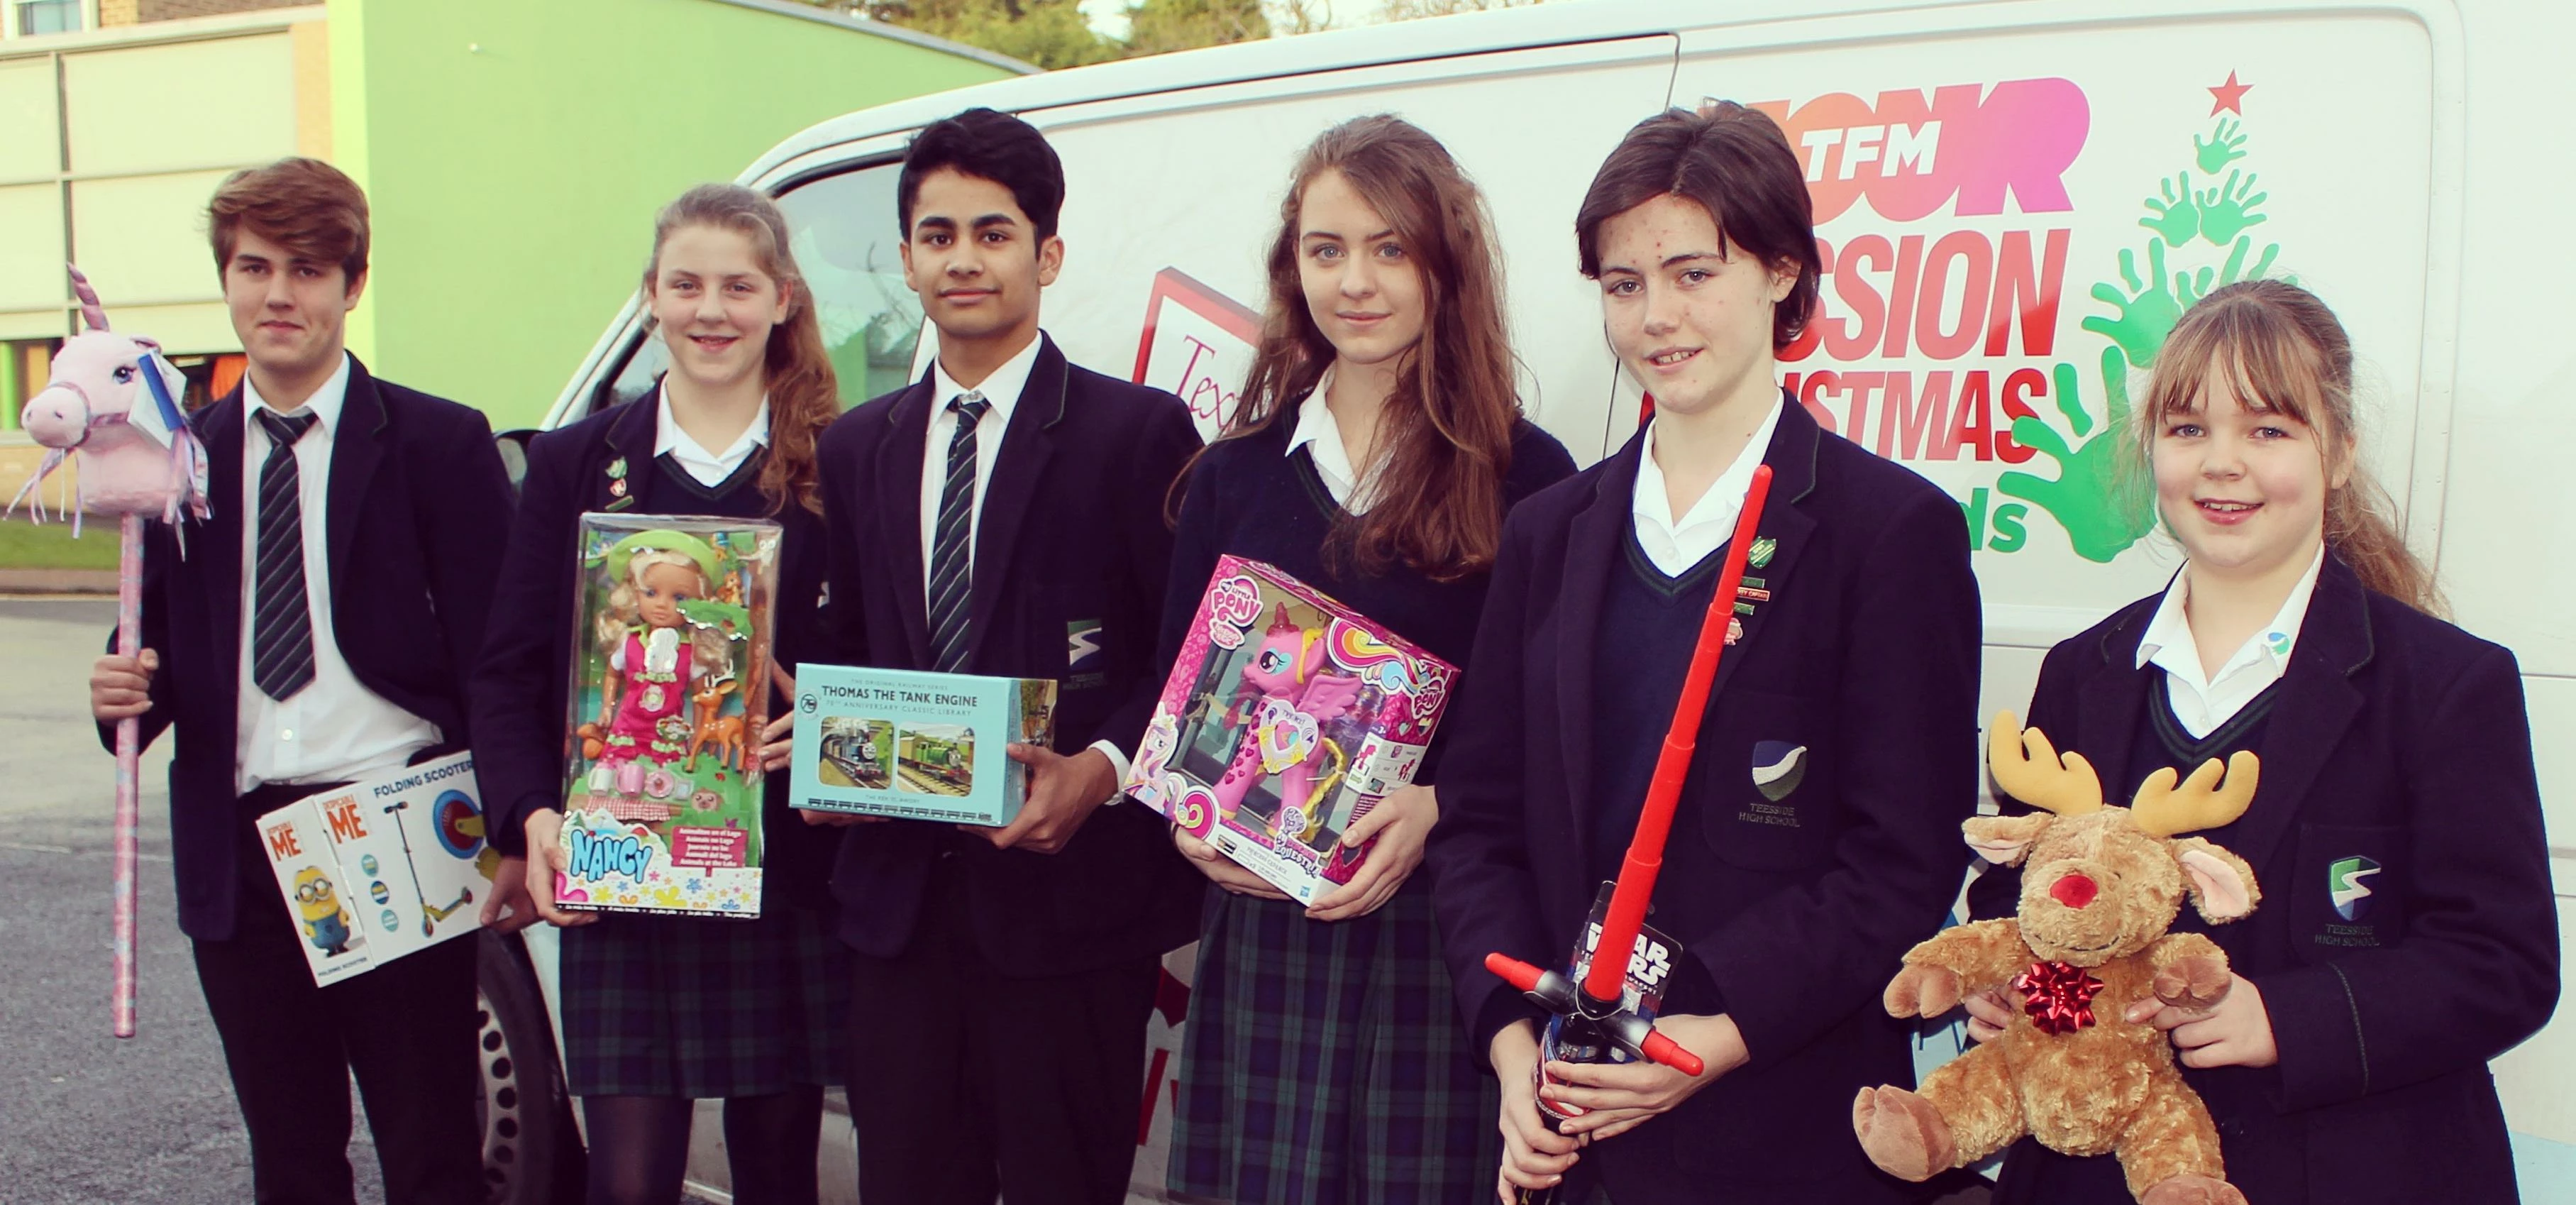 Teesside High School students have been supporting TFM's Mission Christmas